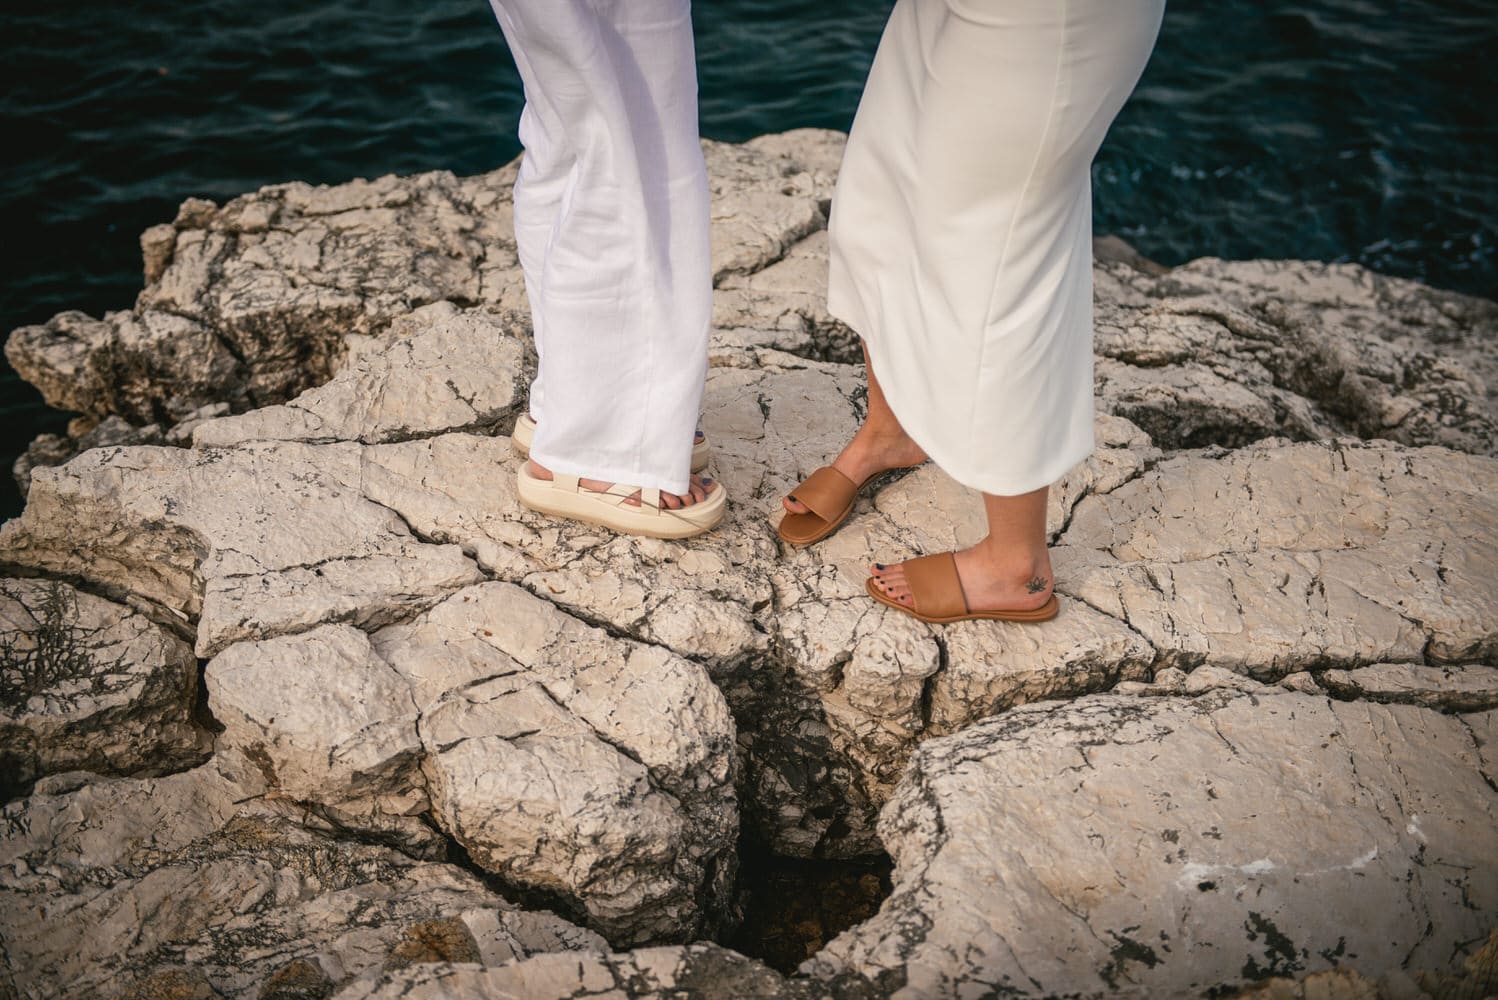 Unity among the serpents: Brides encounter two brown snakes, love's symbol during their Corfu elopement.